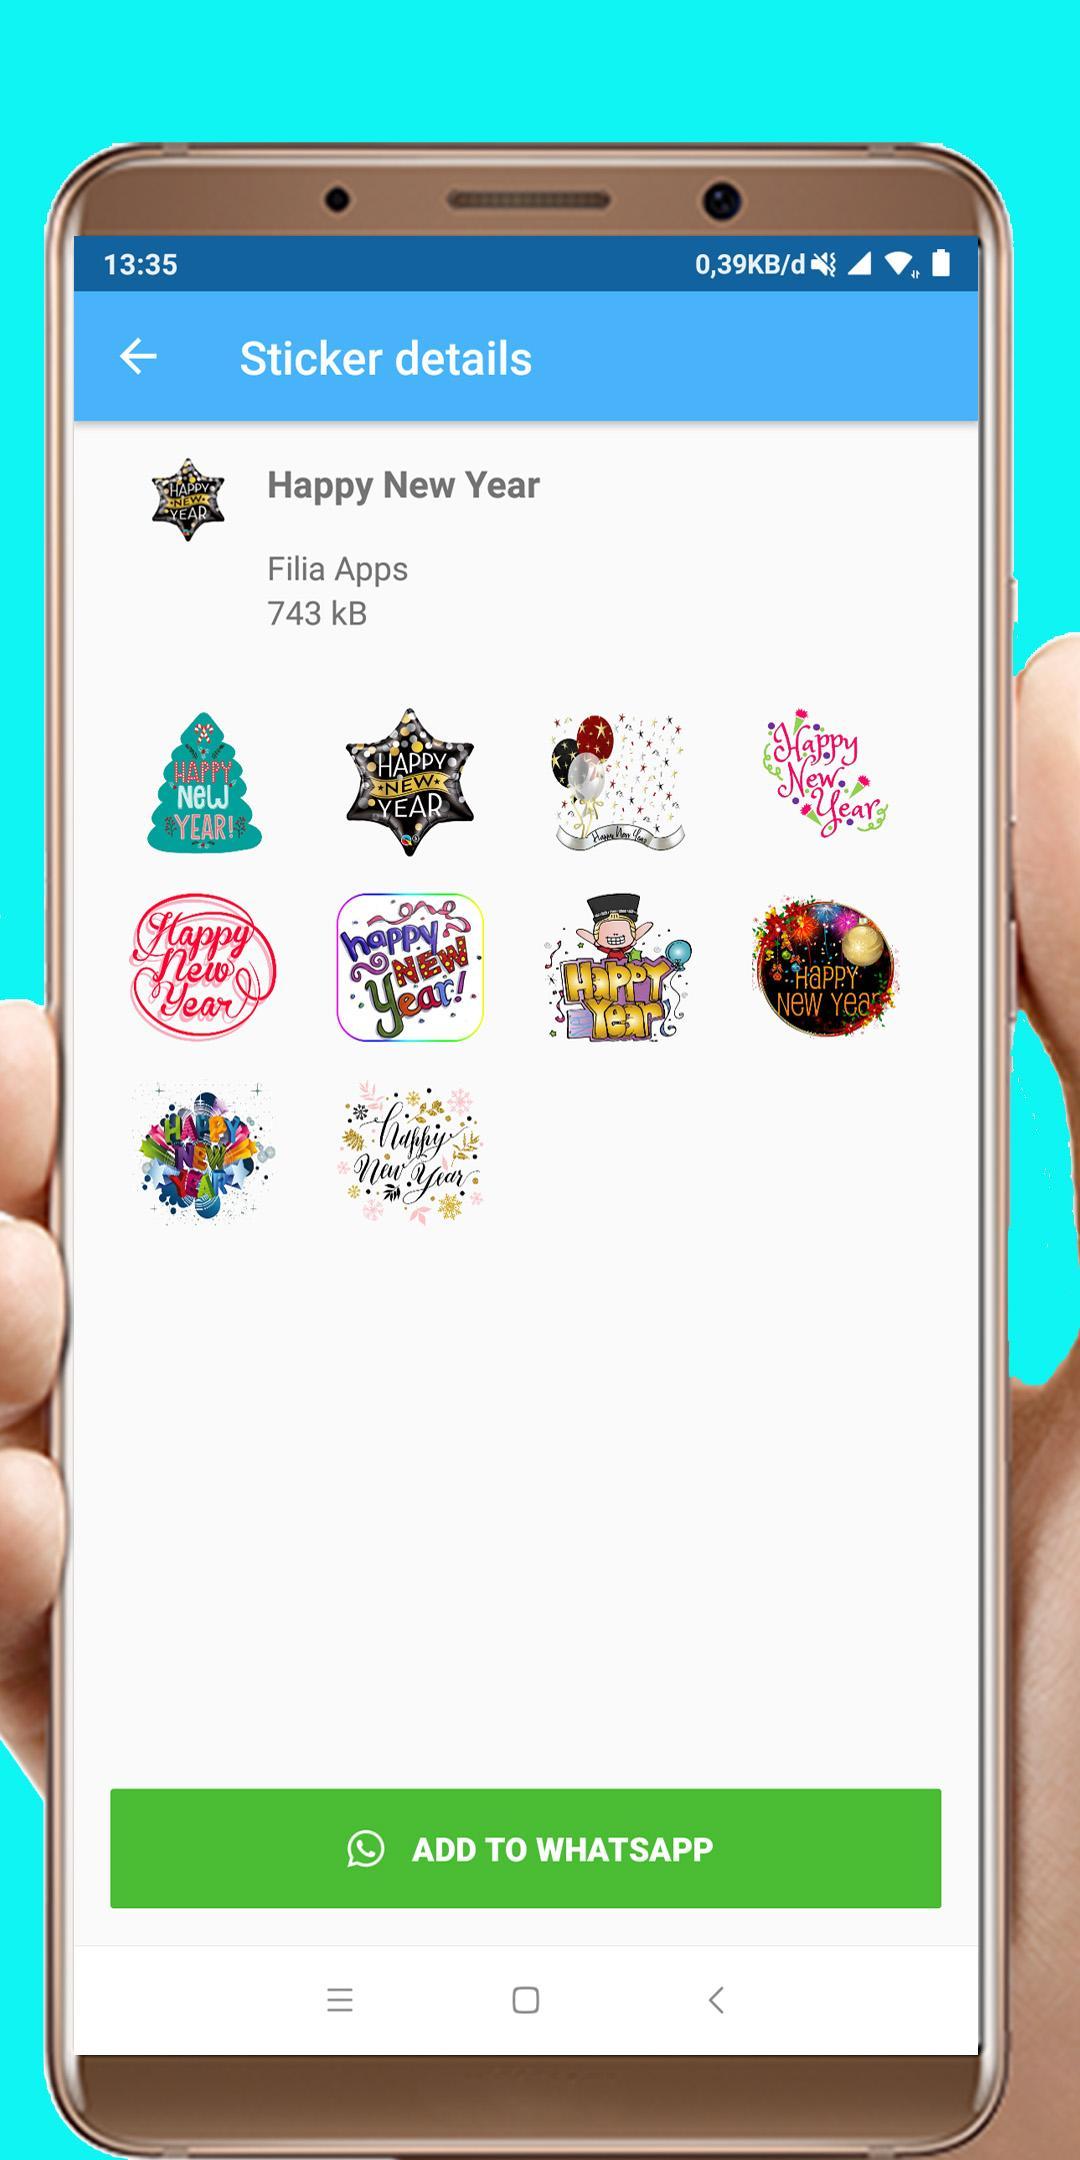 11 Sticker Pack For Whatsapp New Year For Android Apk Download